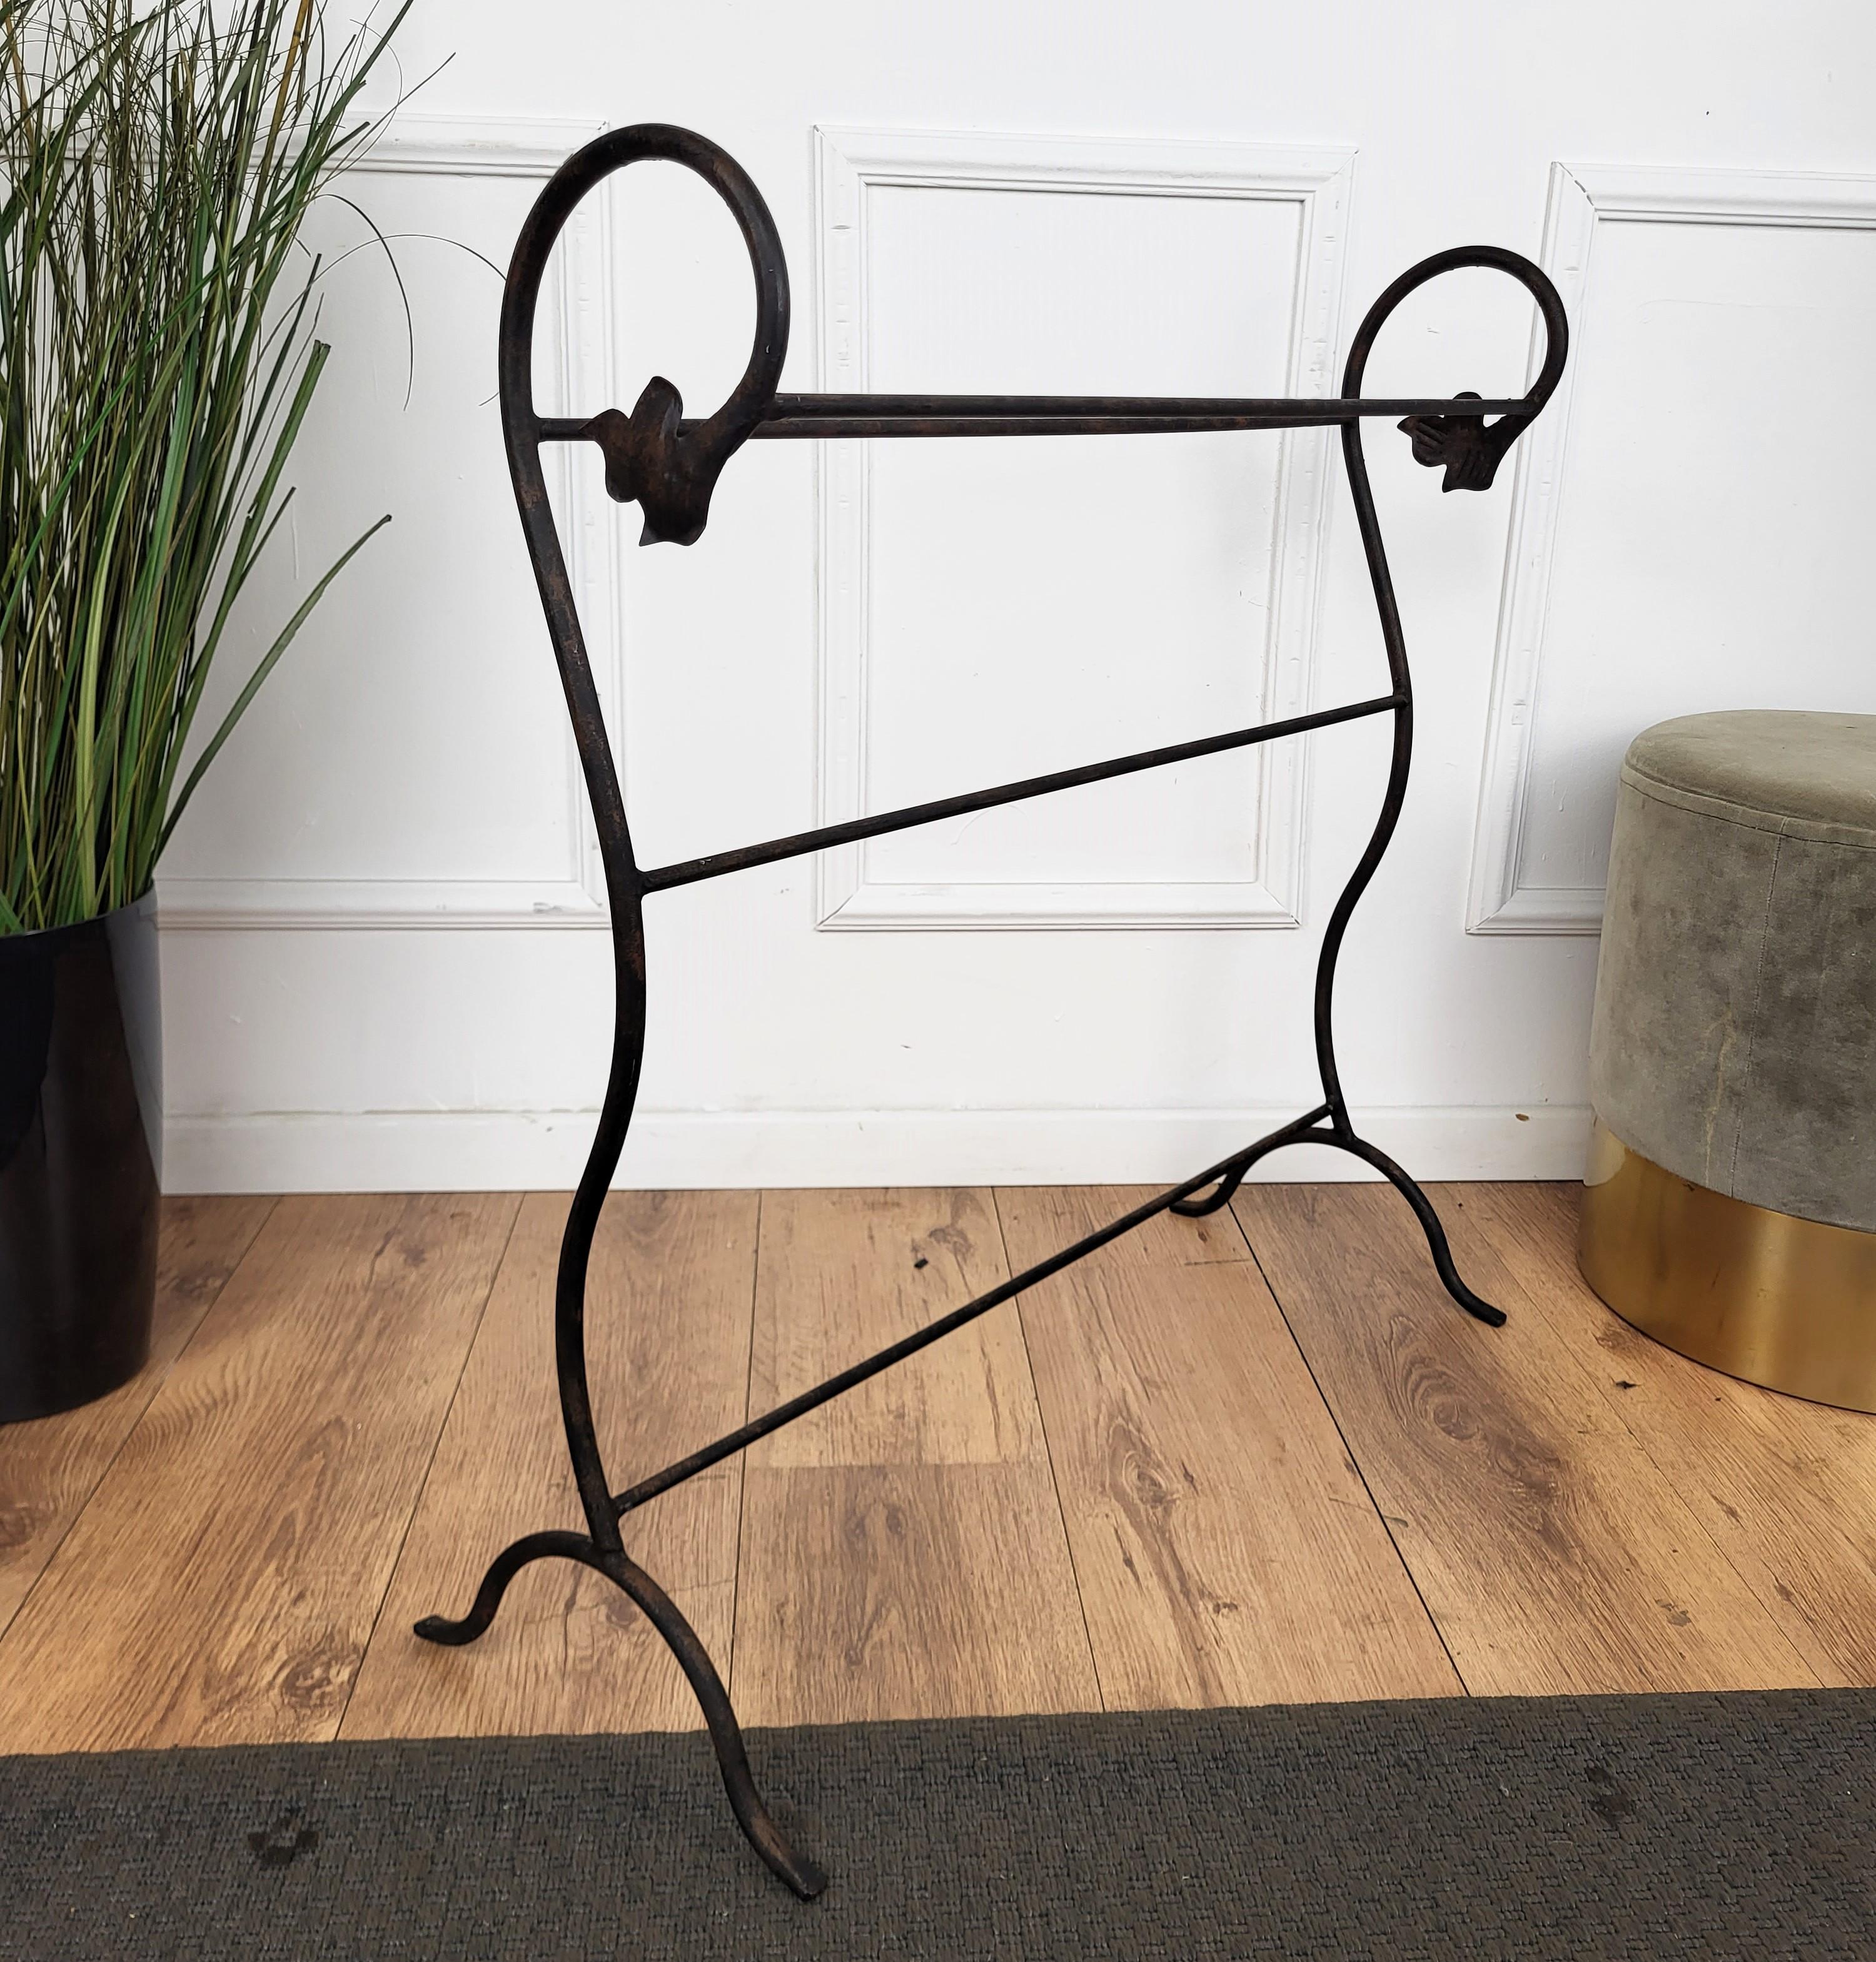 20th Century Italian Wrought Iron Towel Rack Rail with Curved Leaf Decor Legs For Sale